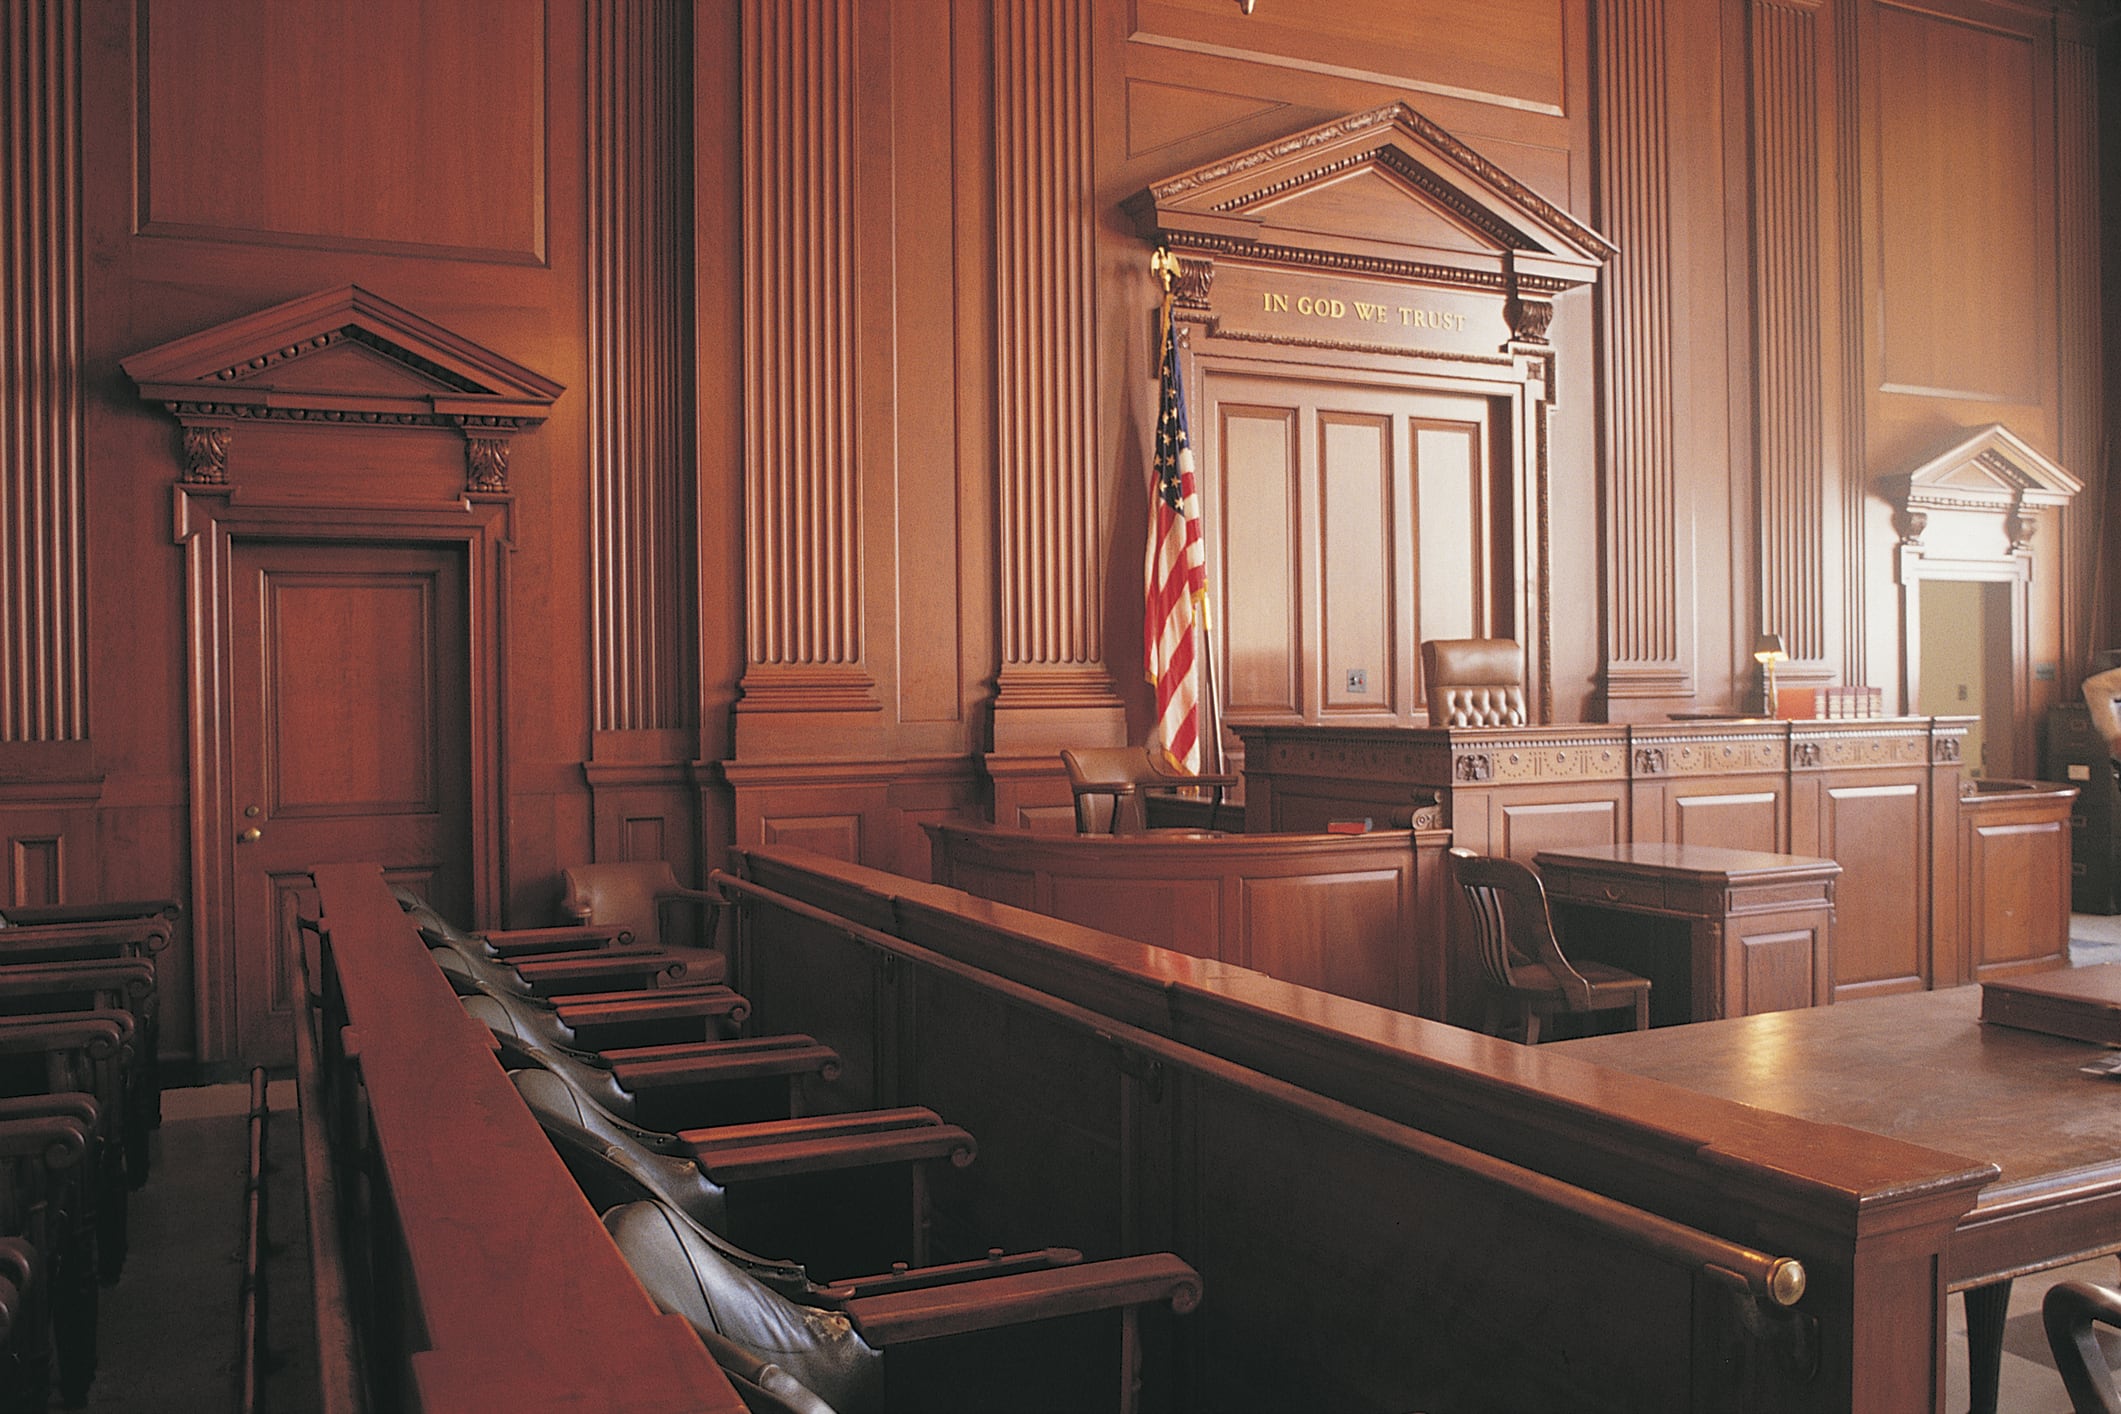 A courtroom sits empty, with deep brown walls and an American flag standing behind the judge’s bench.